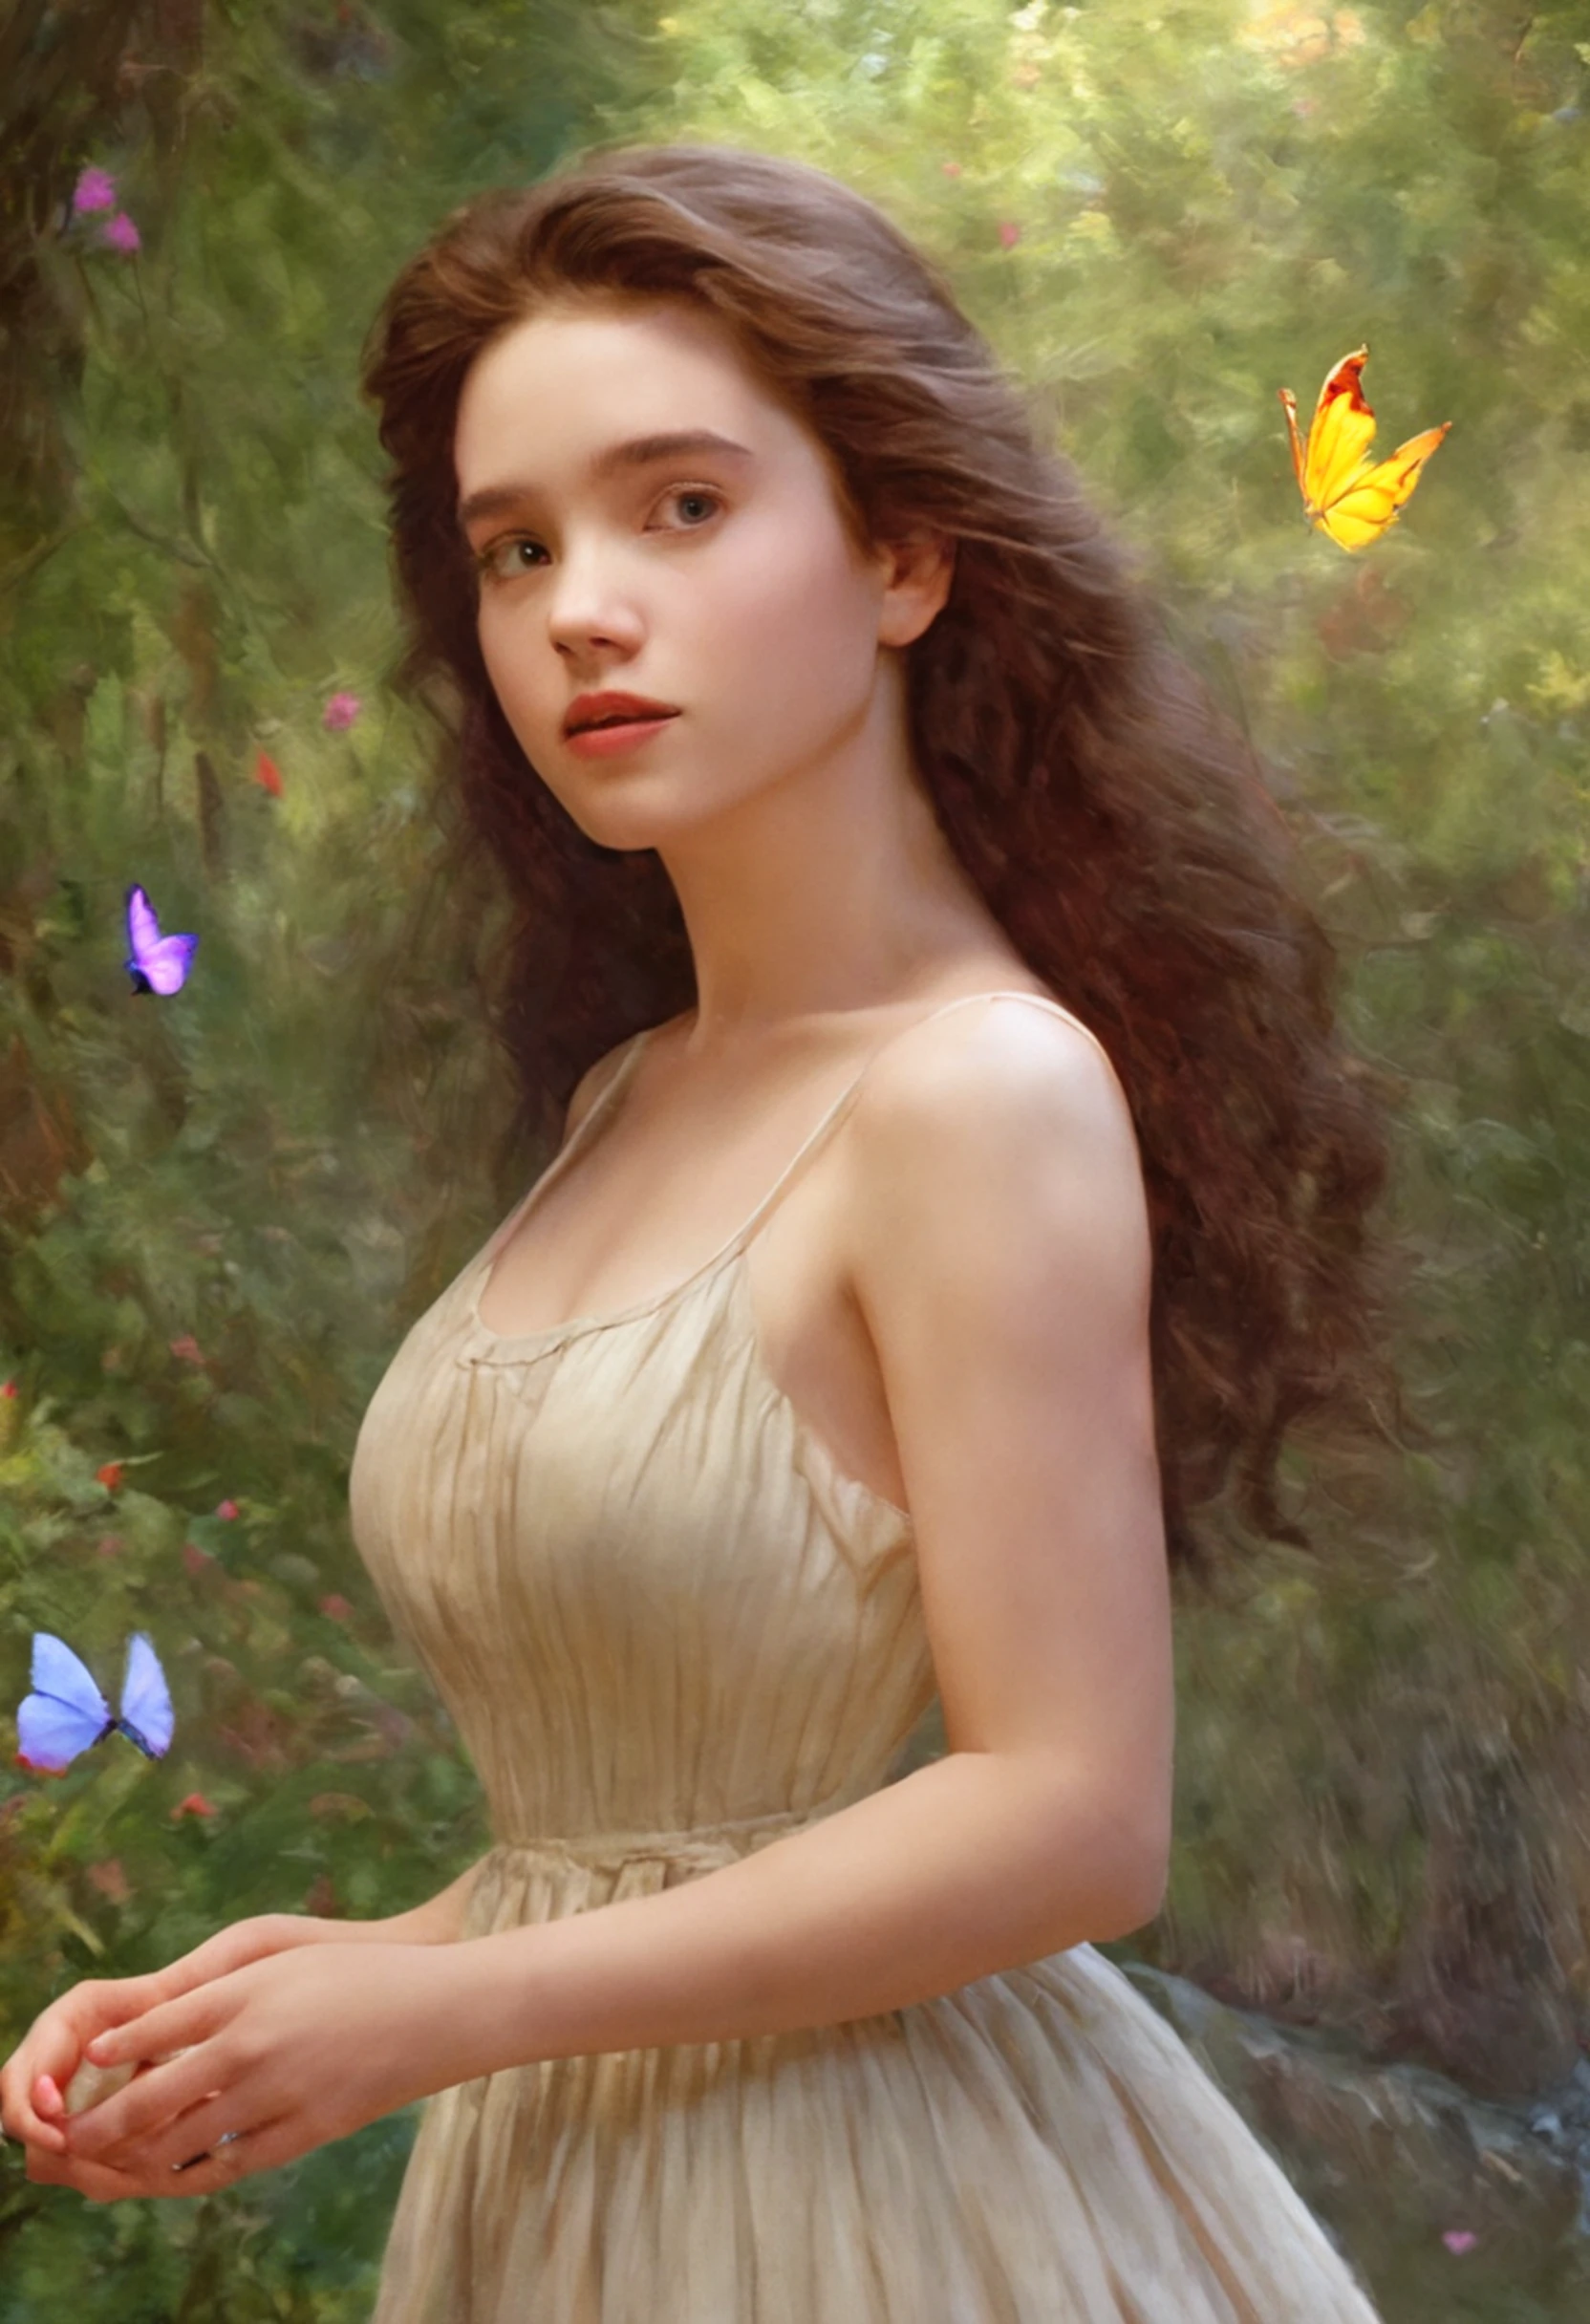 1girl, solo, full body, (masterpiece:1.21), (best quality:1.2), colorful, (illustration:1.2), (cinematic lighting:1.1), (bare shoulders:1.21), (collarbone:1.21)
In this whimsical and fantastical garden, the scene is illuminated by a rainbow of (colorful fireflies), dancing and fluttering in the air. The garden is decorated by a gentle (drizzle), creating a misty and ethereal atmosphere. In the center of the scene, there is a single girl, an extremely delicate and beautiful girl, with cute features and an innocent expression. Her long hair is flowing with the wind. She is wearing no shoulder straps dress, which is ultra low cut, highlighting her delicate curves.

The lighting is very delicate and beautiful, creating a soft and warm glow that highlights the water, making it sparkle like diamonds. The finest grass is also illuminated, creating a lush and verdant carpet. The garden is surrounded by colorful flower fields, with blooms of every color and shape. (Colorful butterflies), of every shade and size, can be seen fluttering around the scene, adding to the overall sense of wonder and magic. (look ai viewer),A blush can be seen on her nose, and her mouth is slightly open, adding to the overall sense of innocence and youthfulness. Falling petals can be seen floating around her, adding to the overall sense of romance and beauty. A gentle wind is blowing through the scene, making the leaves rustle and the flowers sway, adding to the overall sense of movement and life. This is a scene of pure wonder and magic, filled with color and beauty, where the viewer can lose themselves in the enchanting and captivating world.